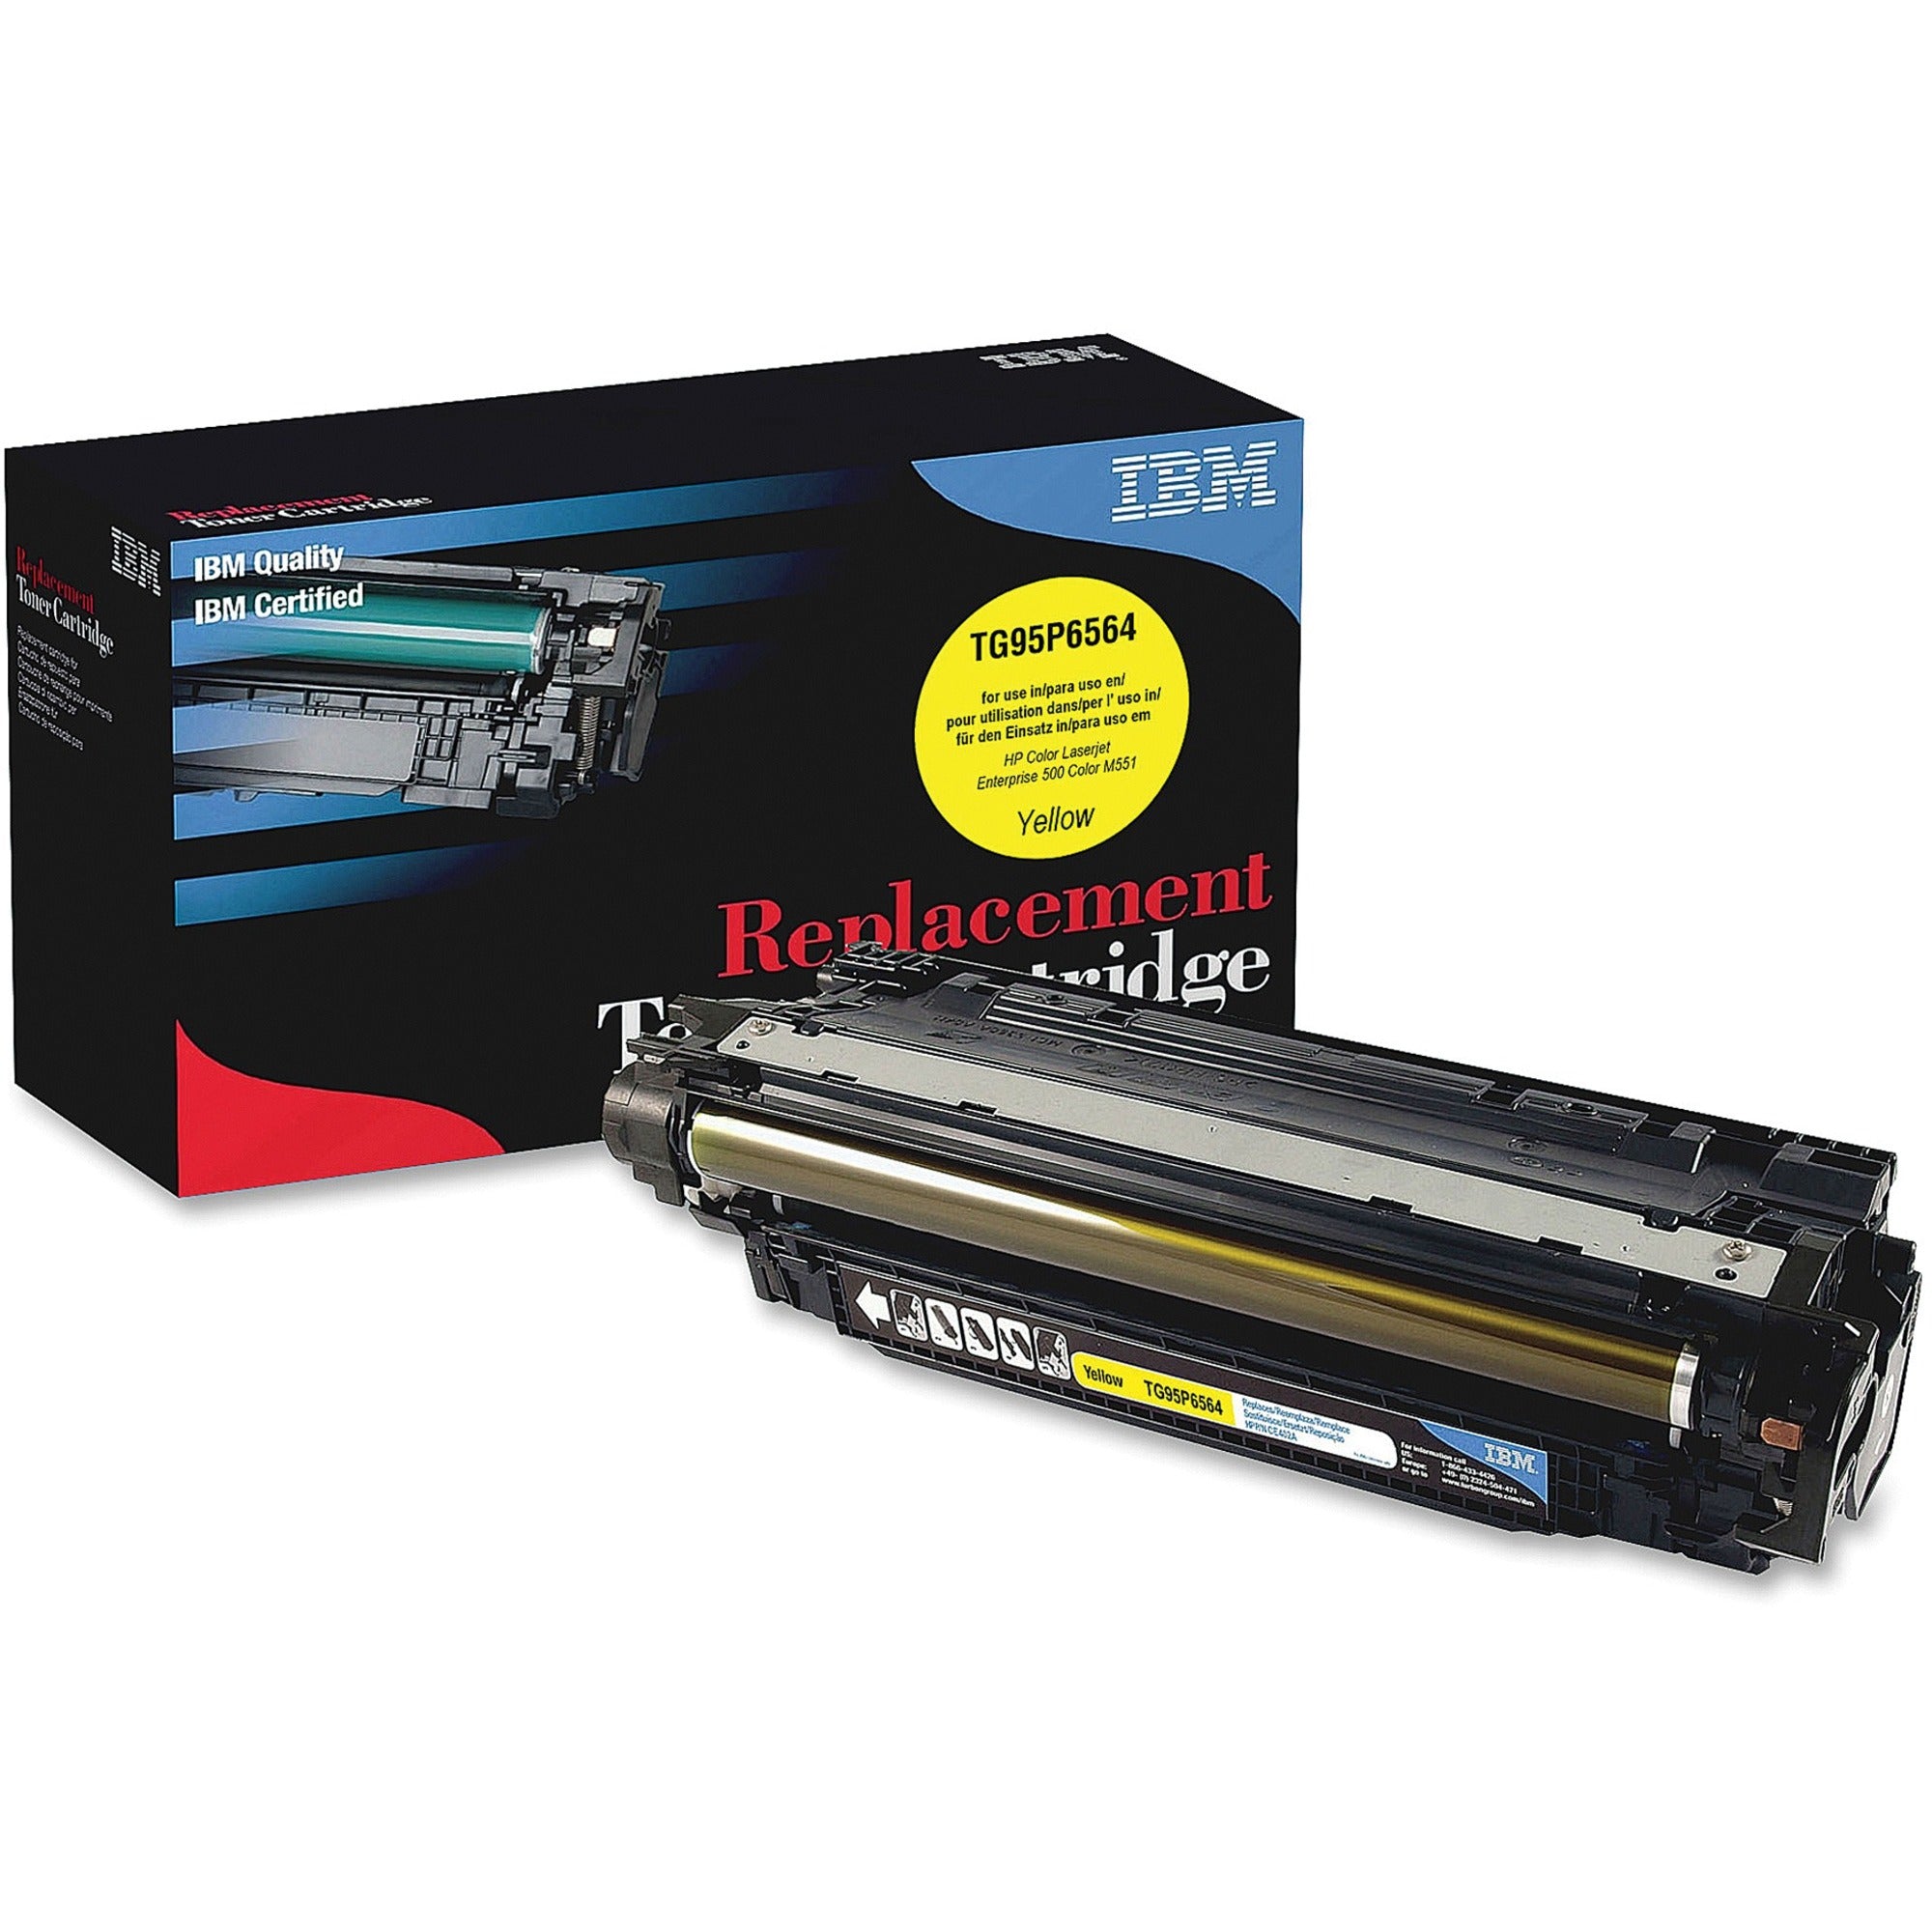 IBM Remanufactured Laser Toner Cartridge - Alternative for HP 507A (CE402A) - Yellow - 1 Each - 6000 Pages - 